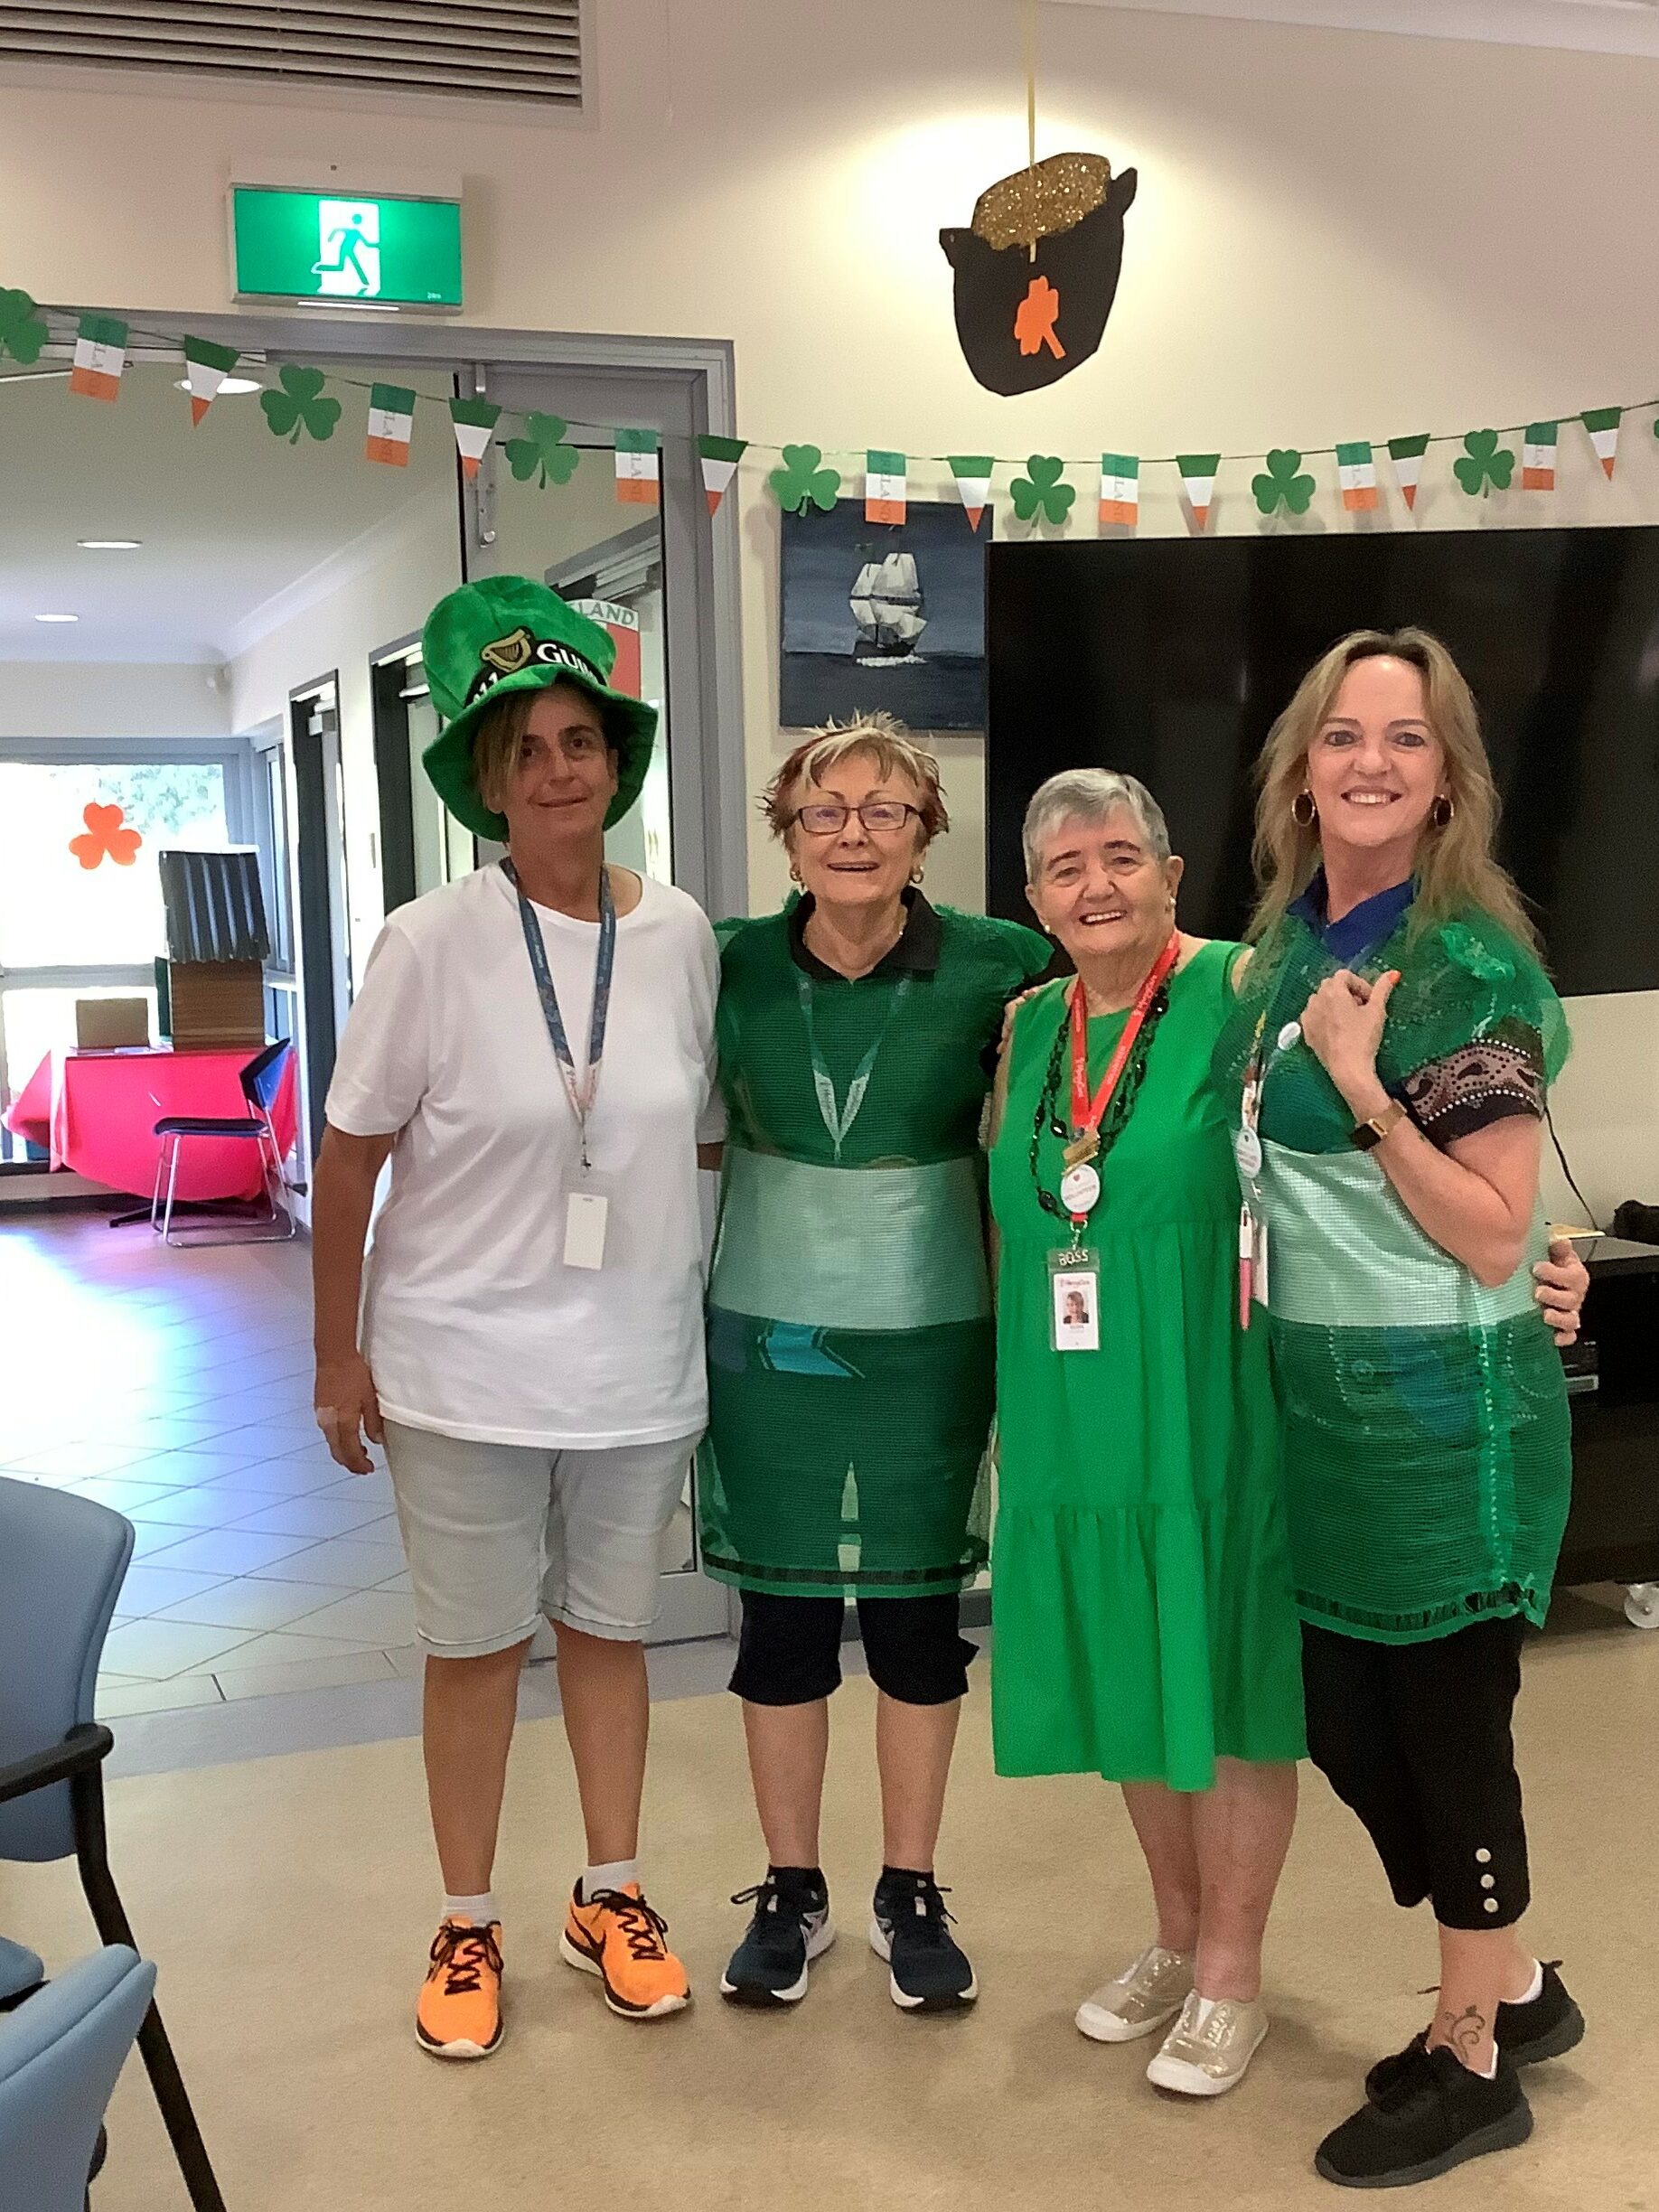 Staff and volunteers dressed up for St Paddy's Day